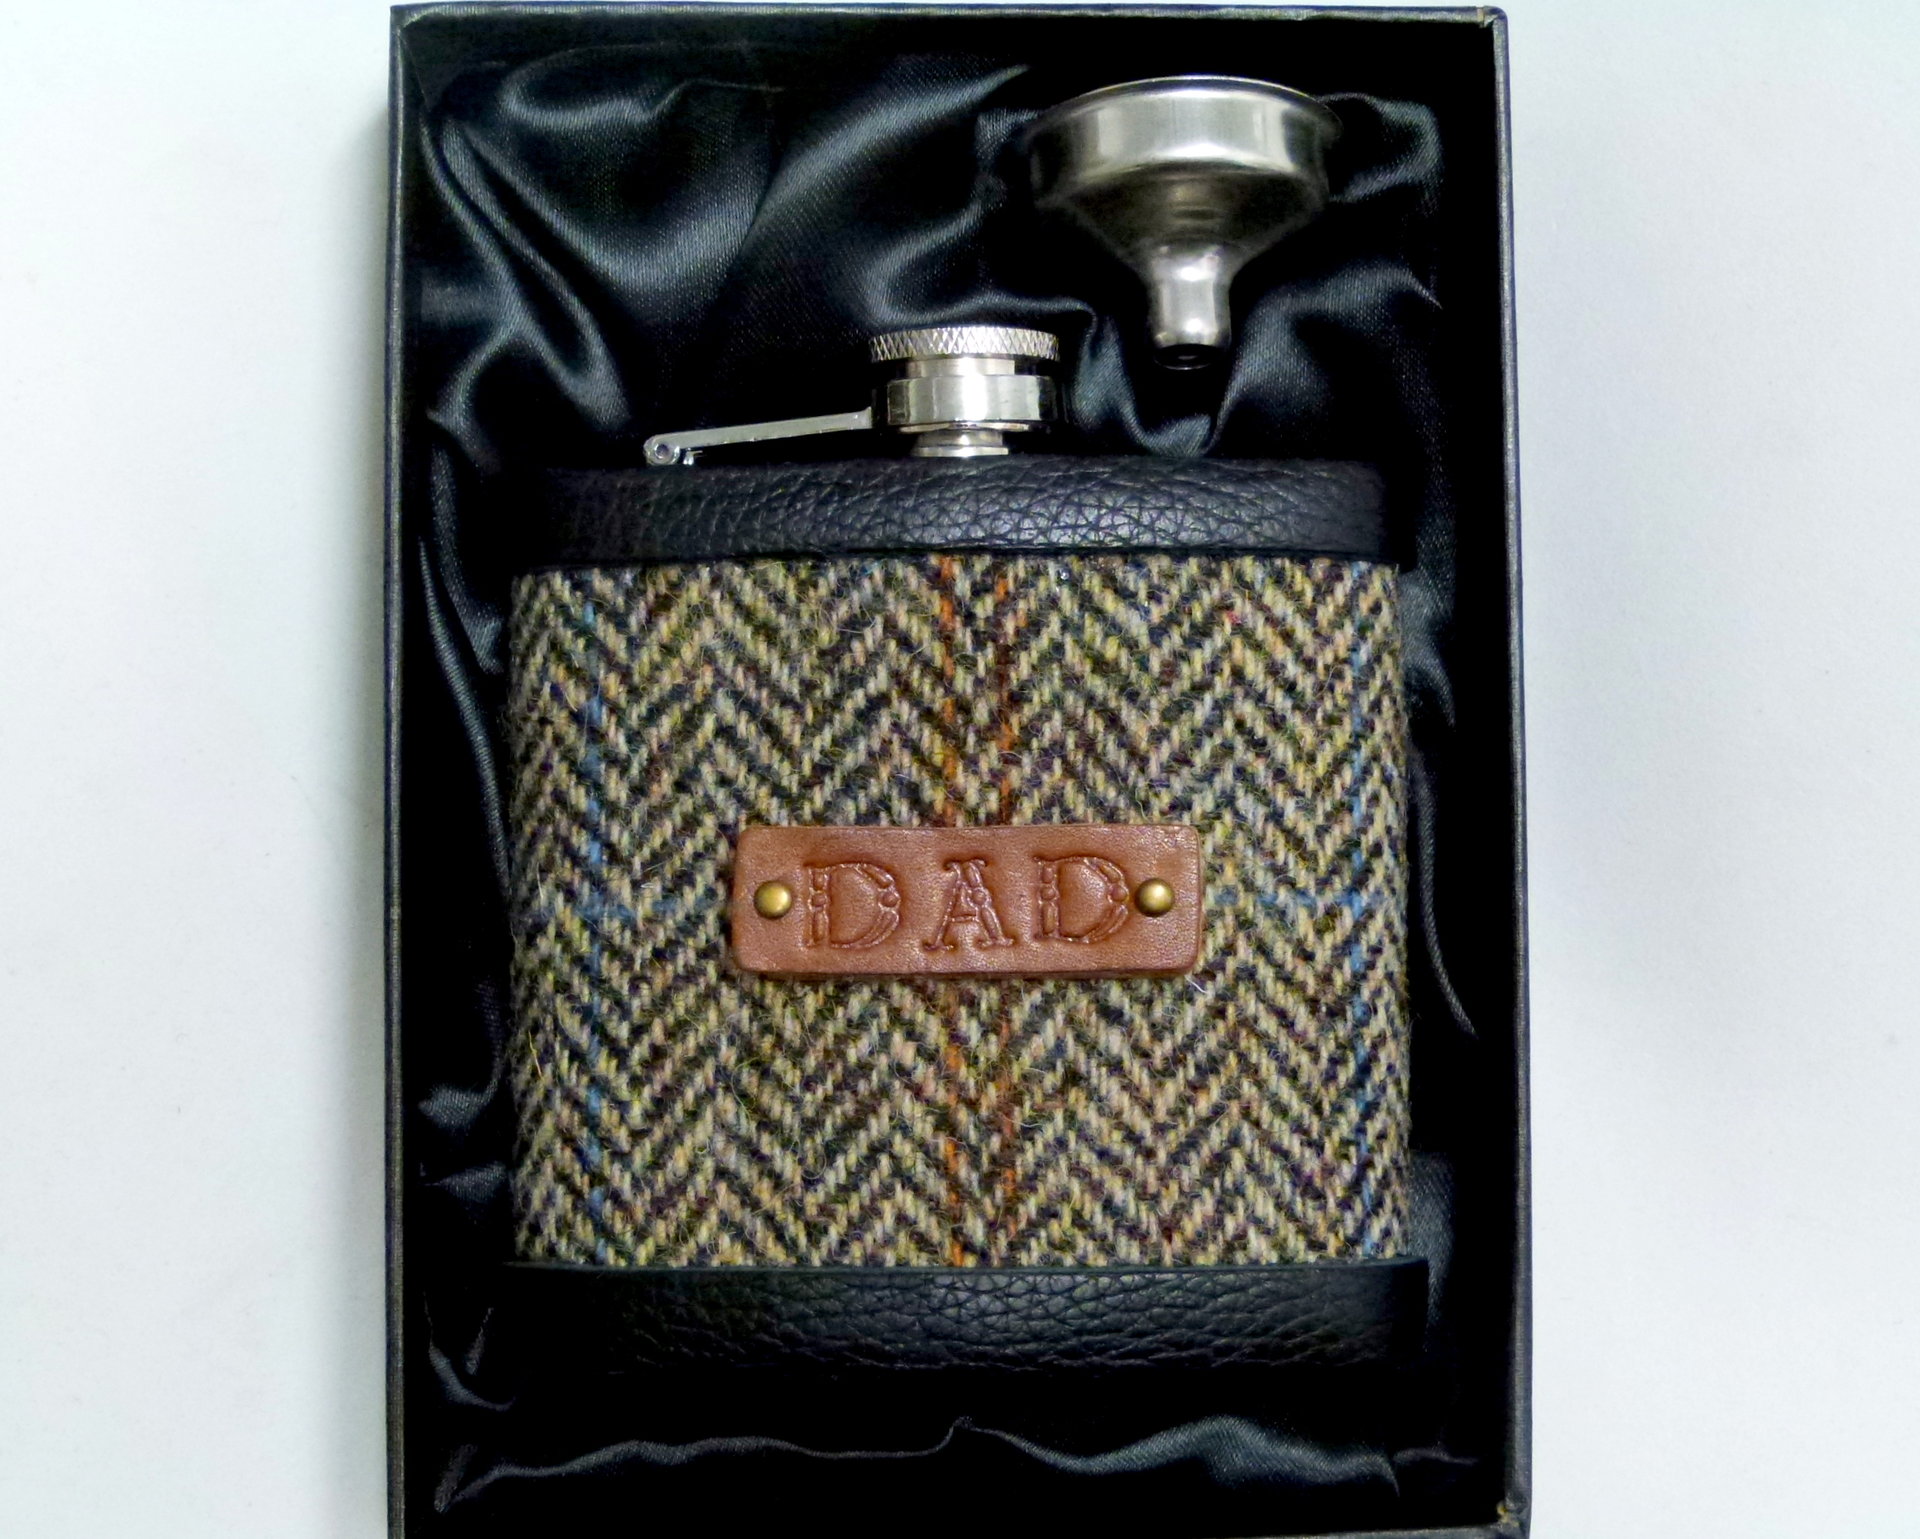 gift-for-dad-harris-tweed-hip flask-father-fathers day gift-personalised